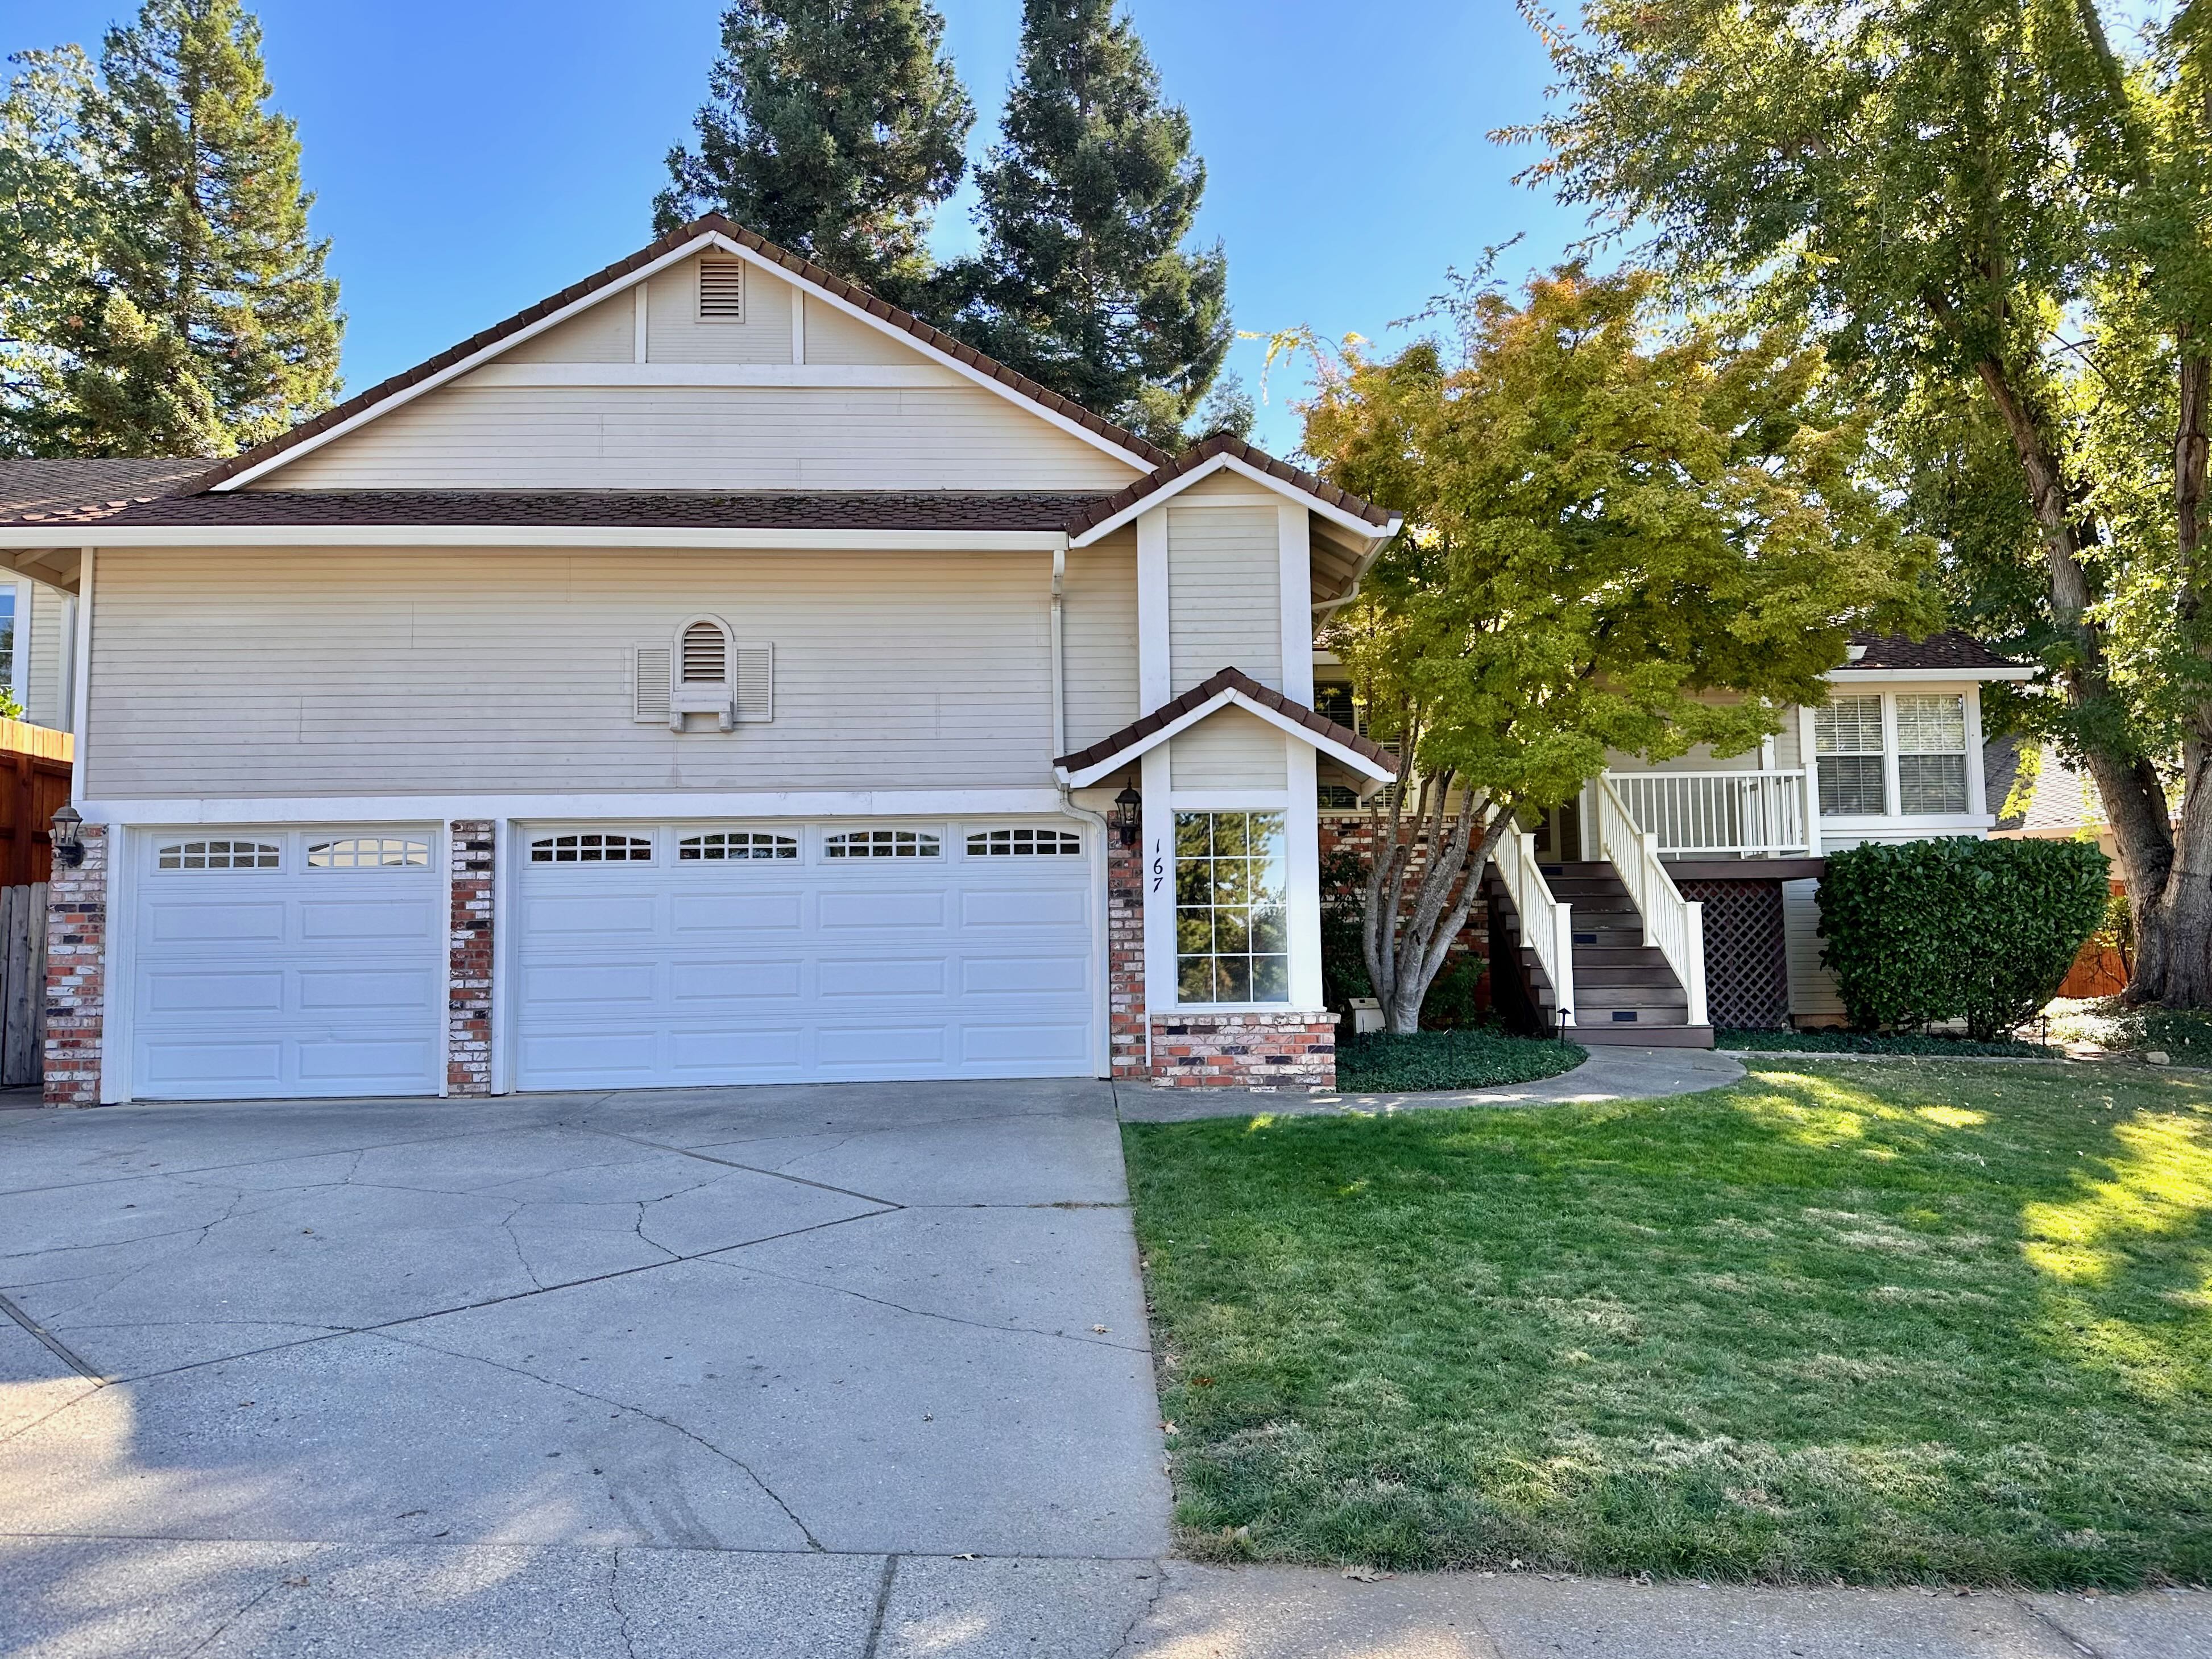 FOR RENT: 167 Northridge Dr, Grass Valley CA 95945